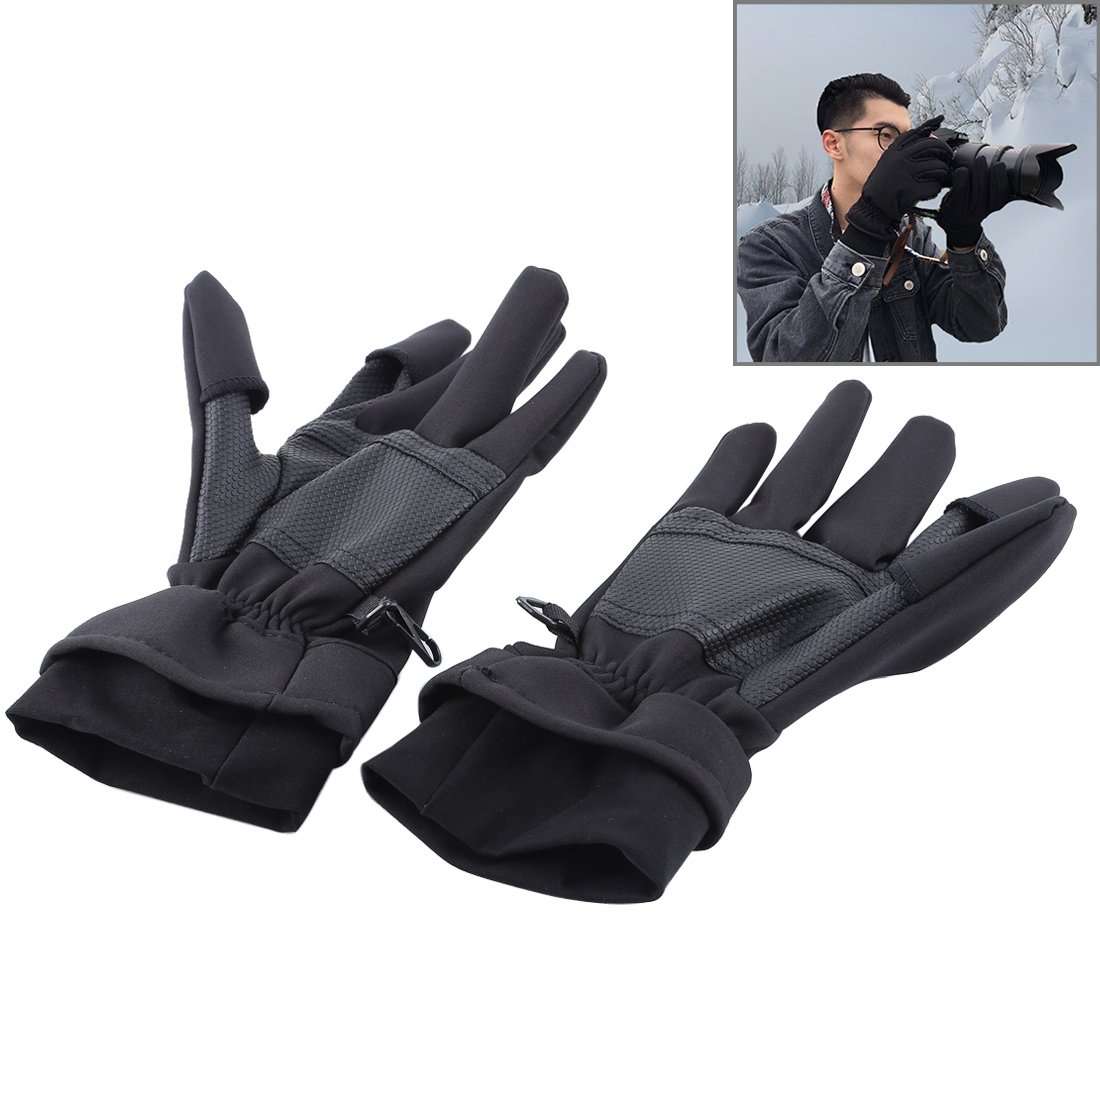 Amzer Outdoor Sports Wind-Stopper Full Finger Winter Warm Photography Gloves, Size: S